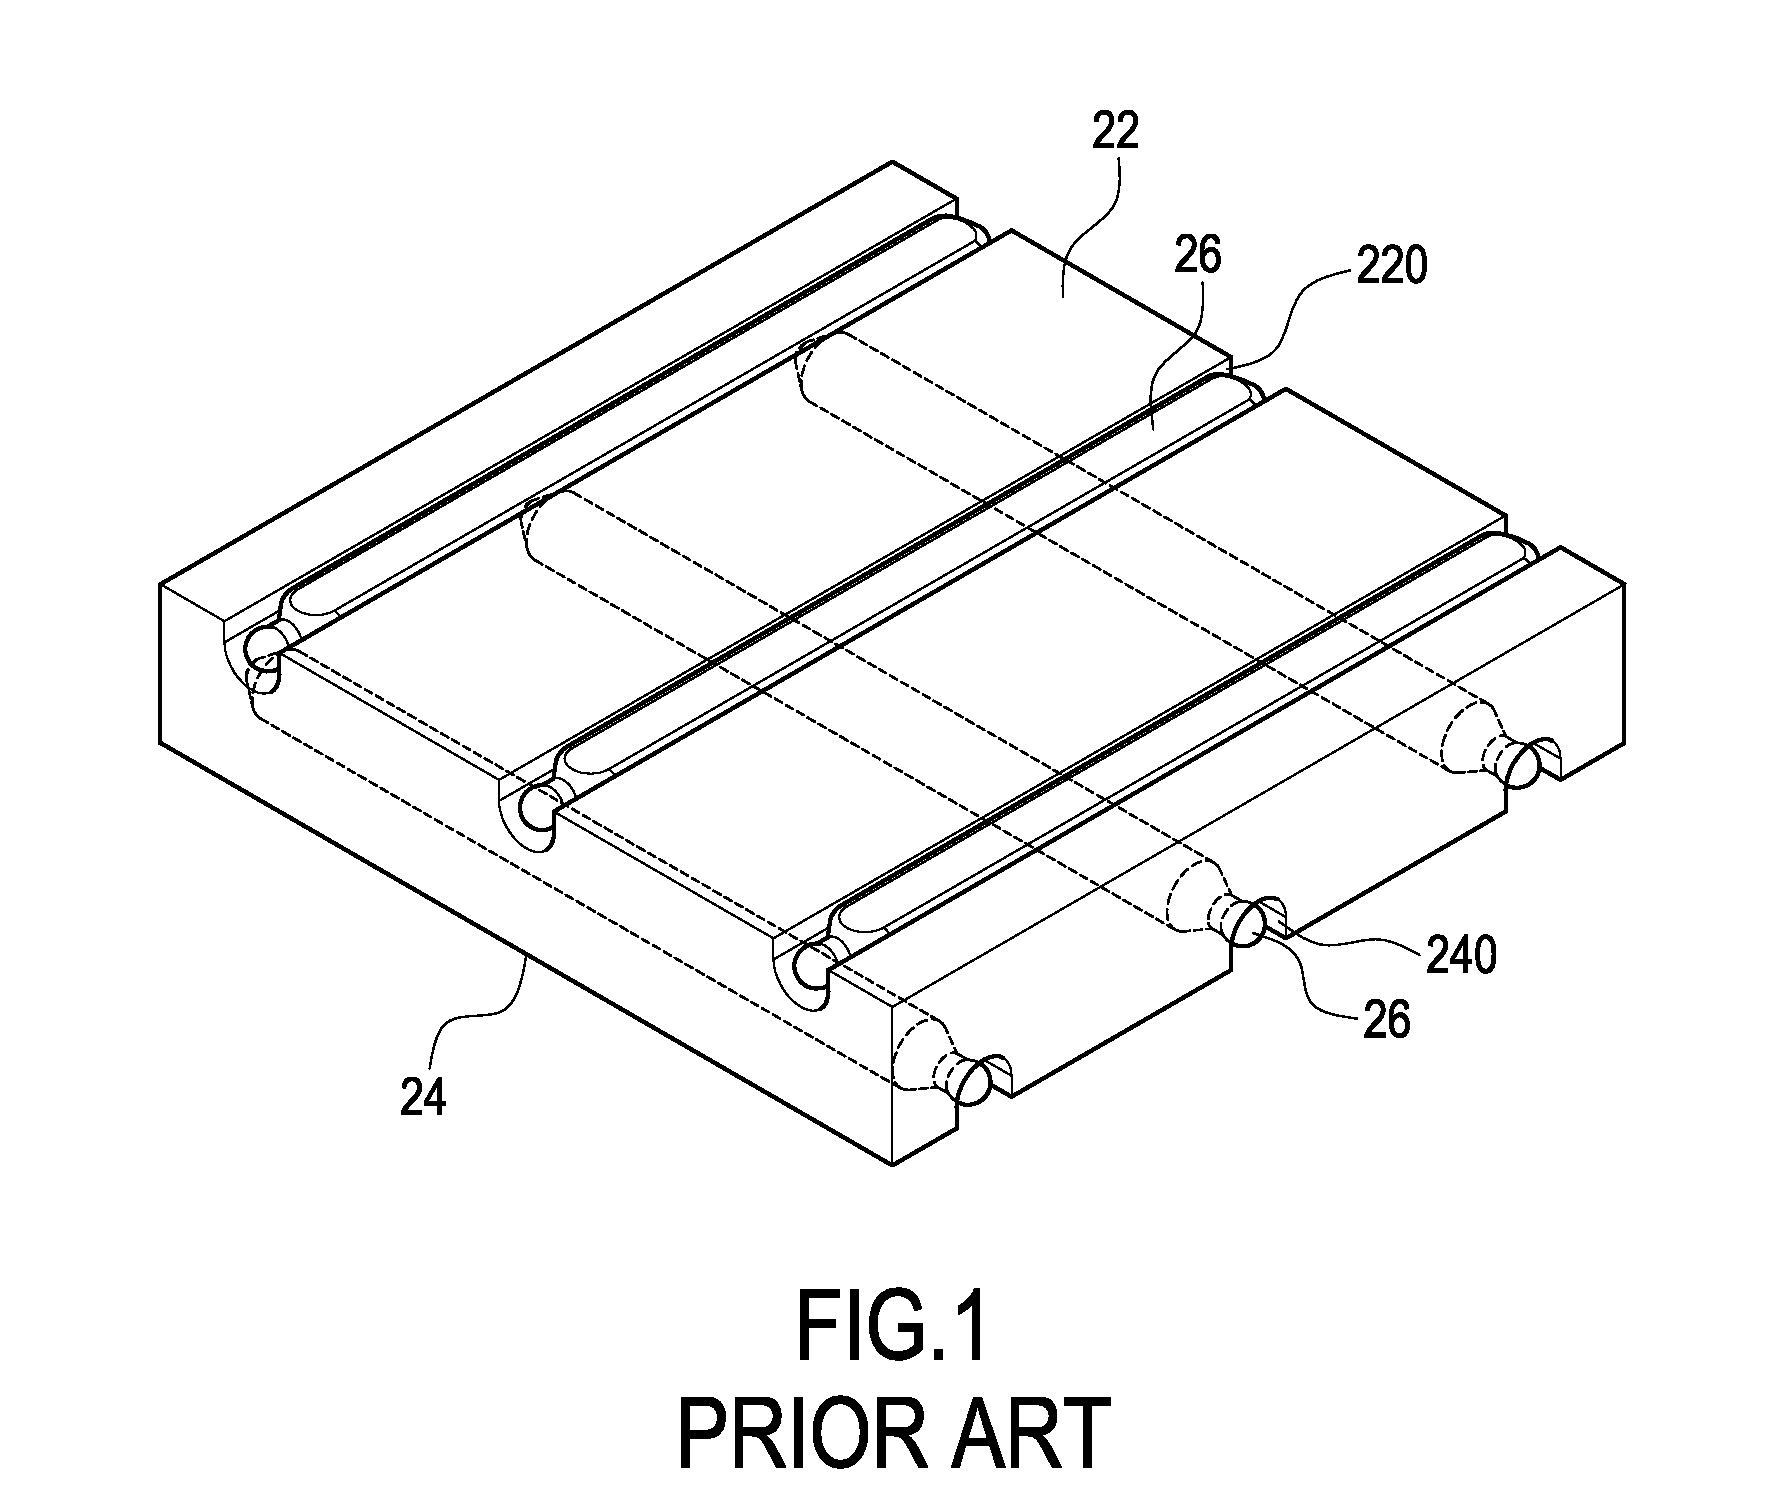 Isothermal Plate Module